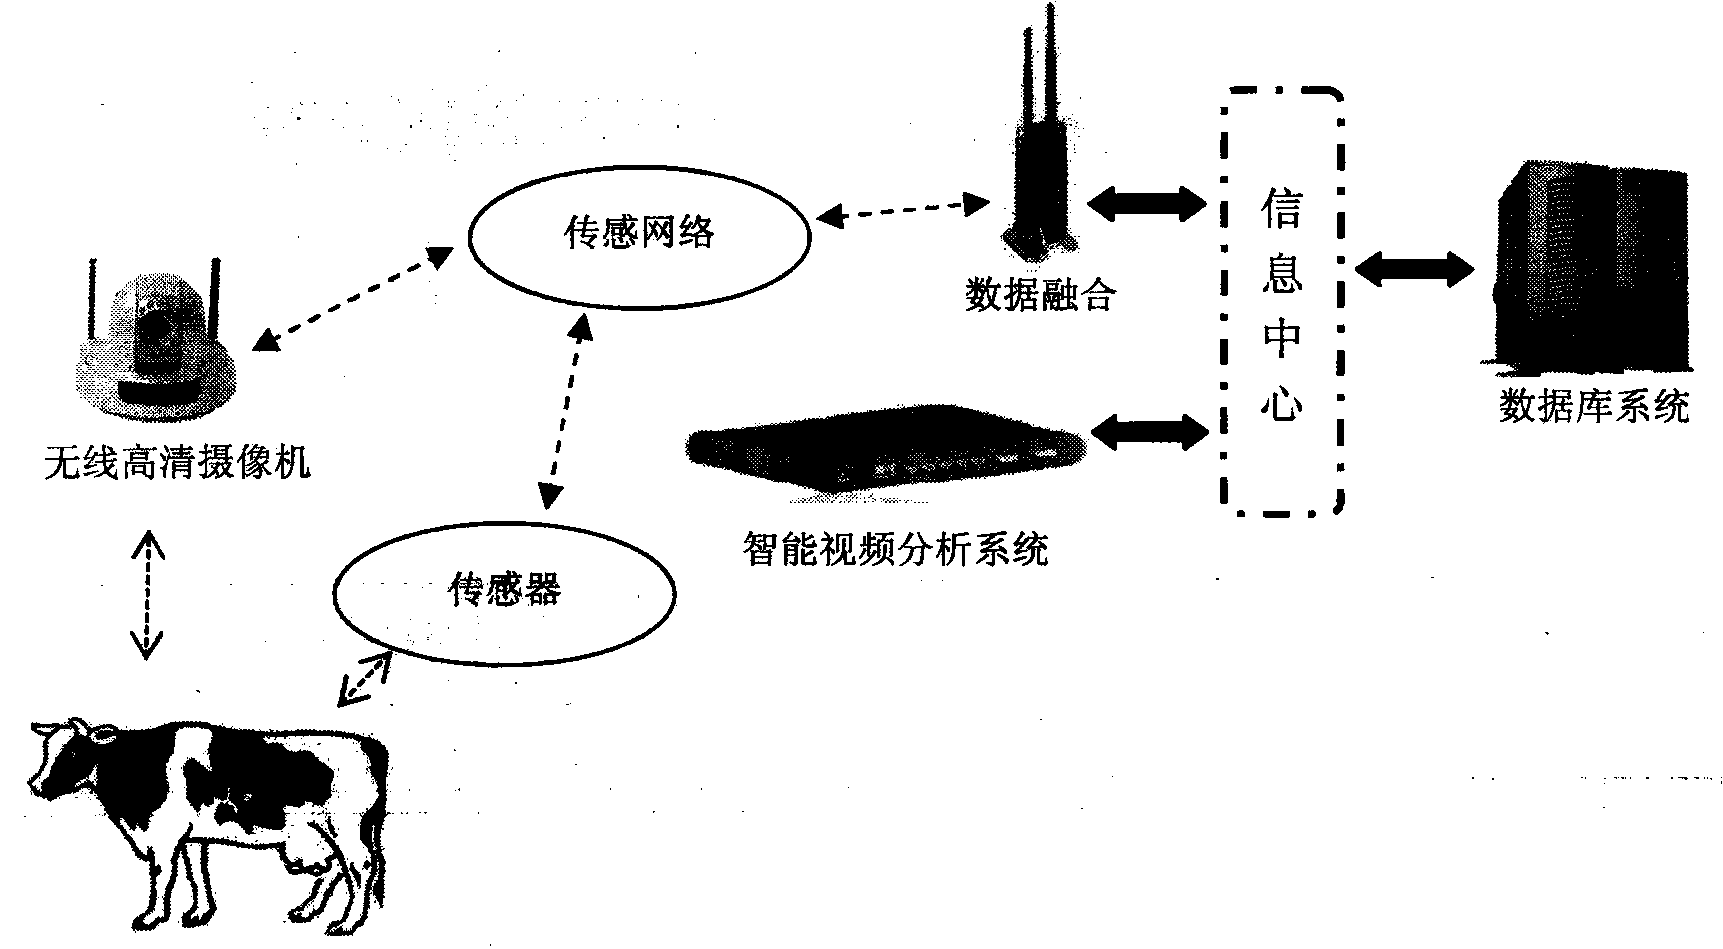 Sensor communication system and method for conducting monitoring through same